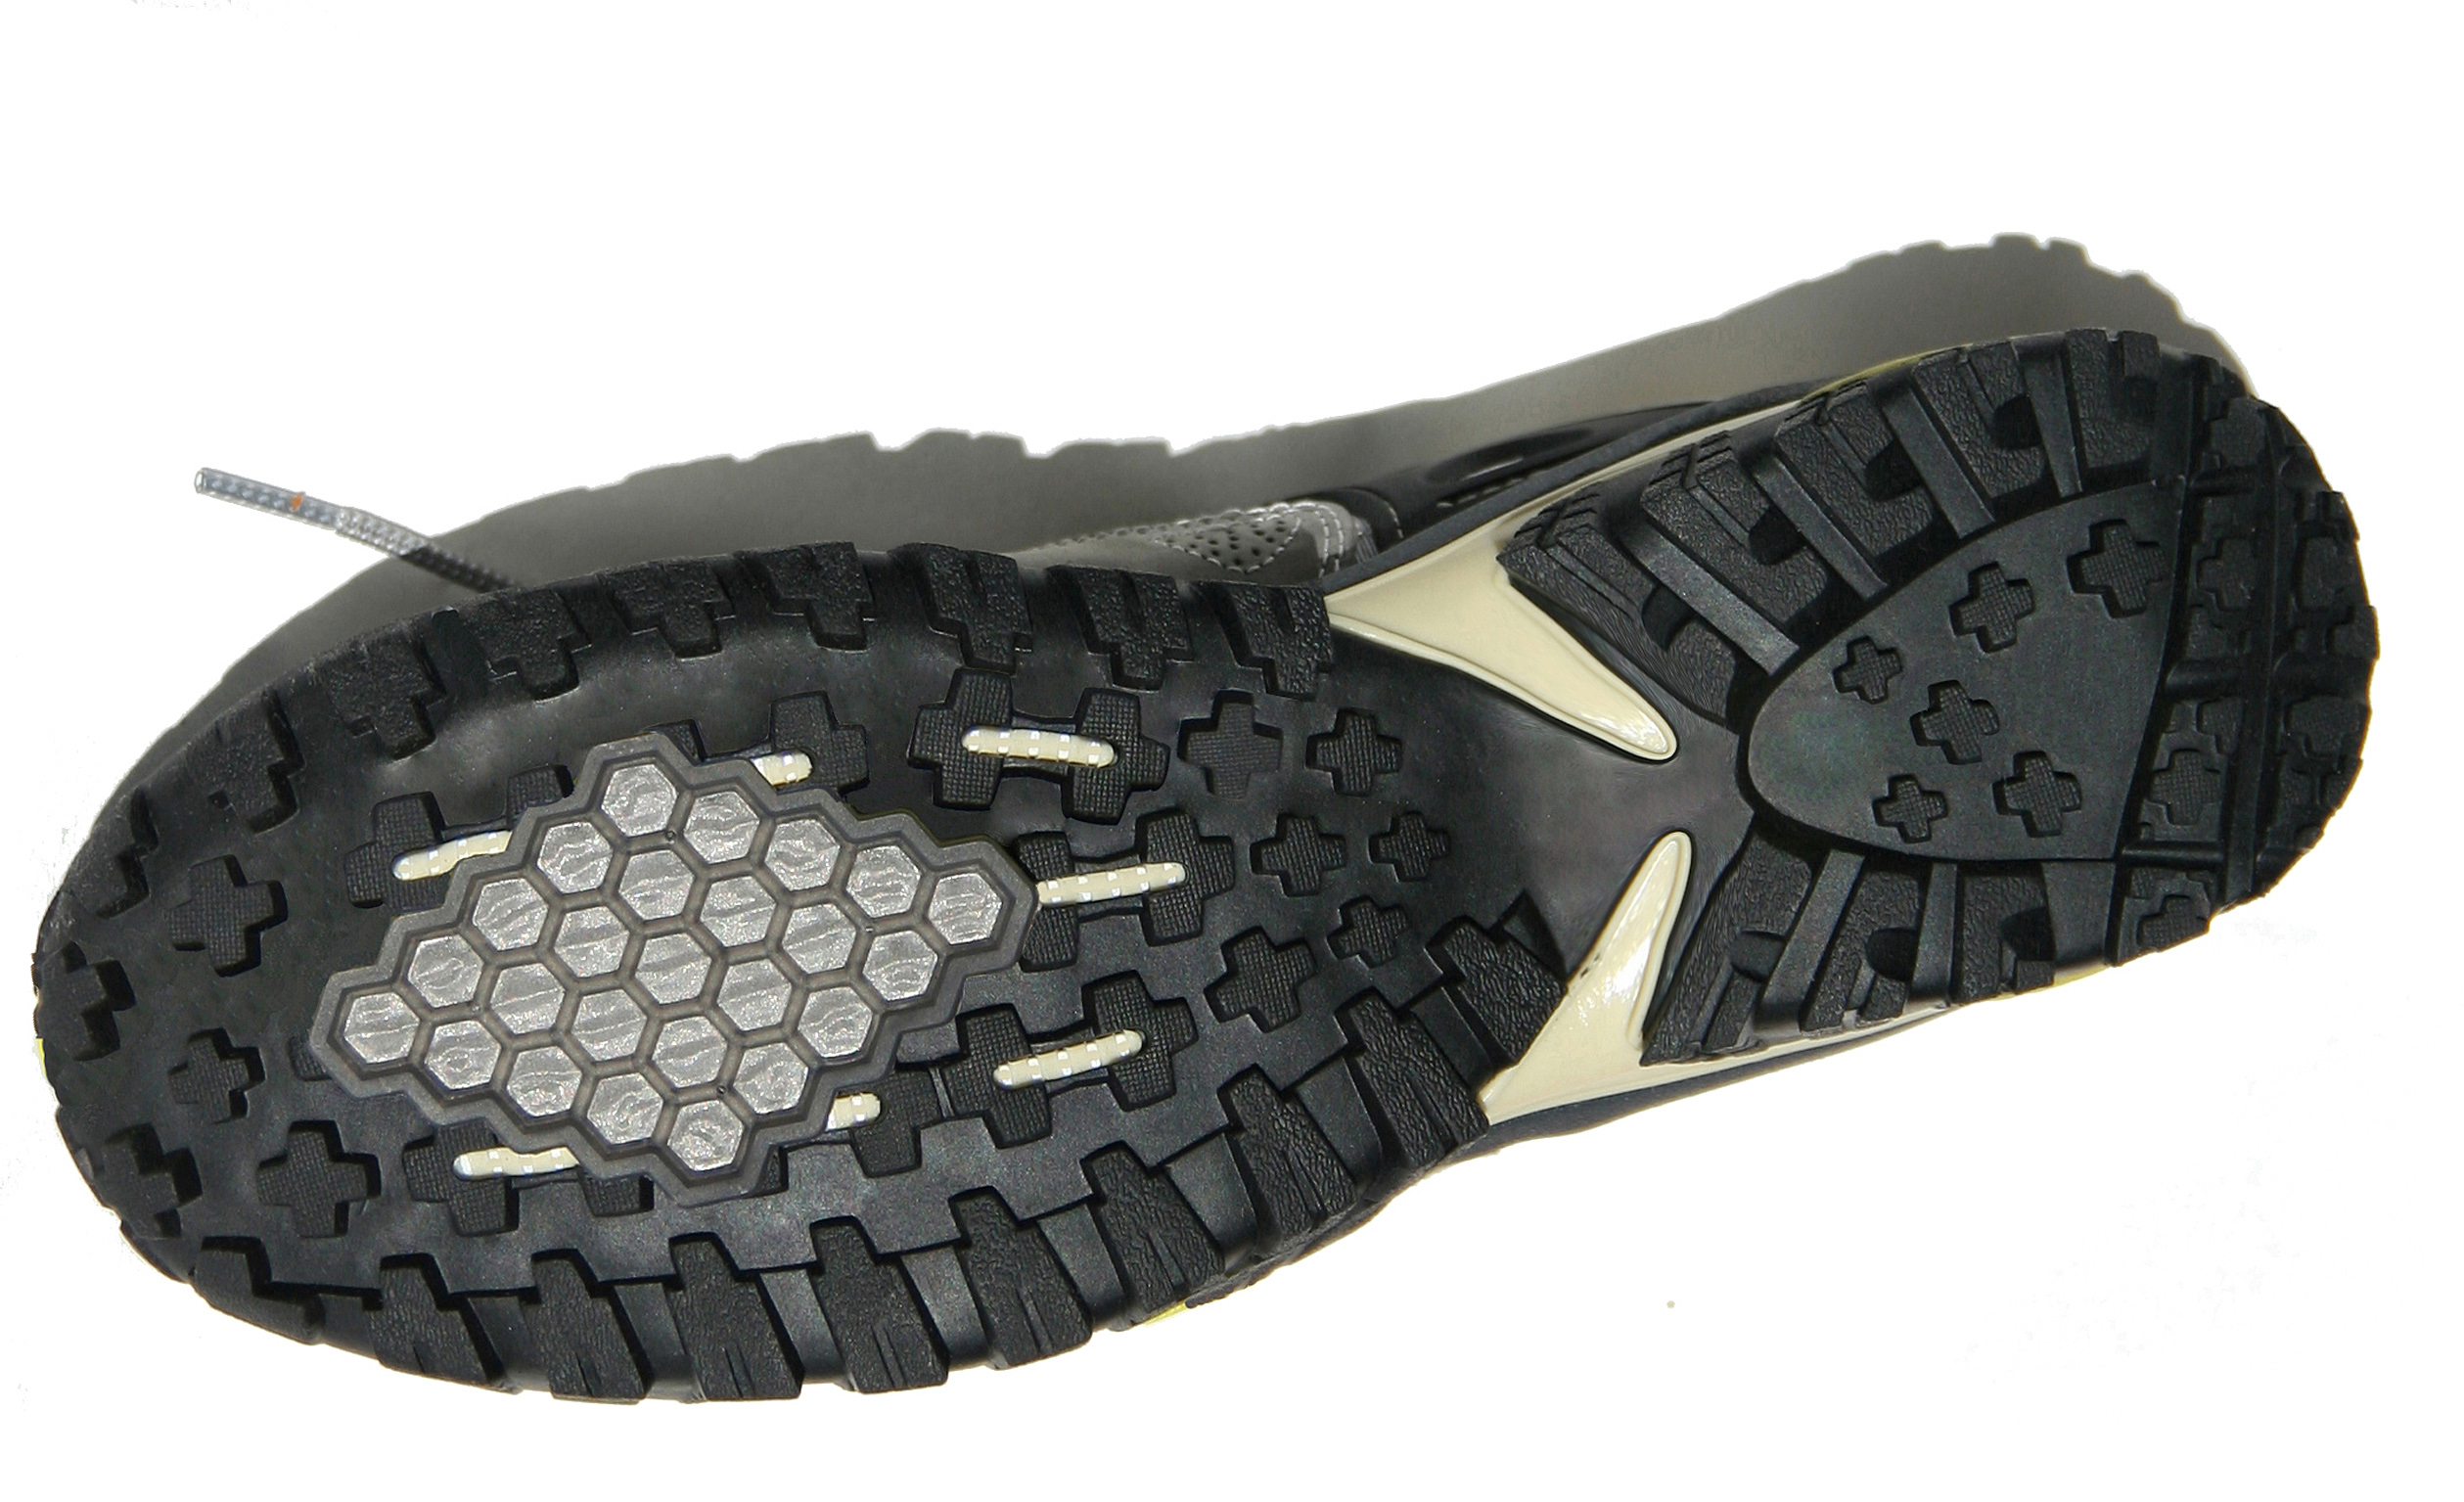 Innovative Technology Adapts Shoes to Weather Conditions